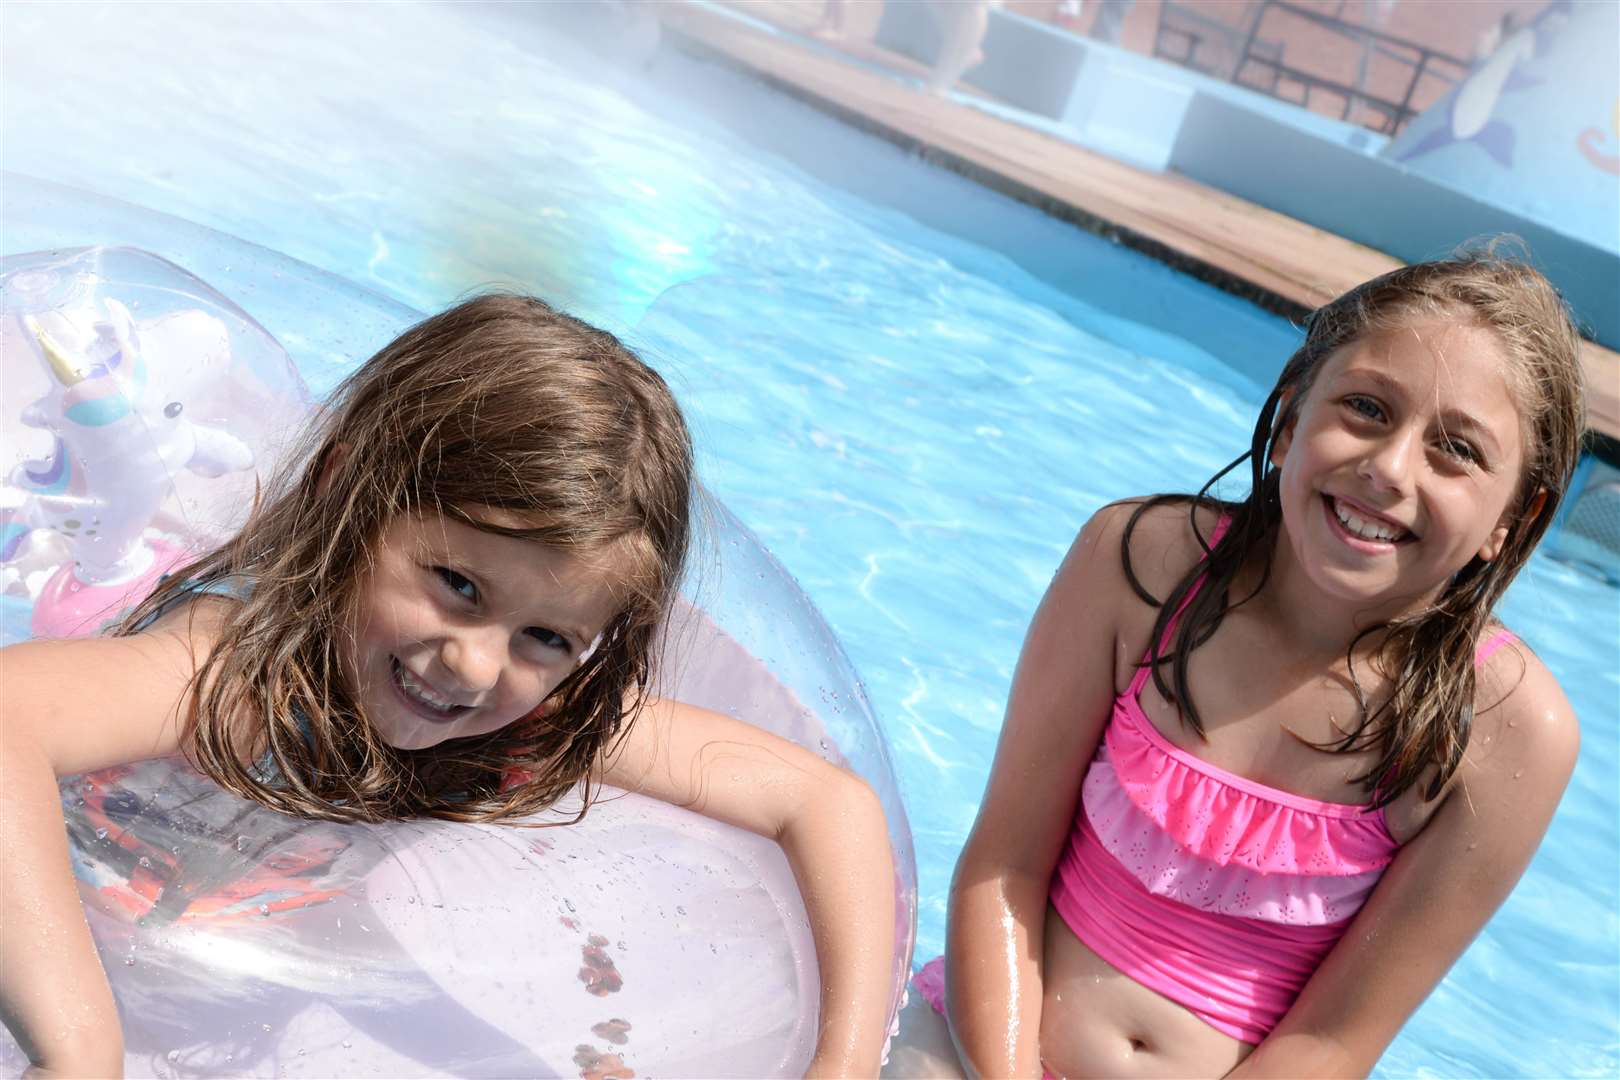 Take the kids to an outdoor pool if the weather is warm